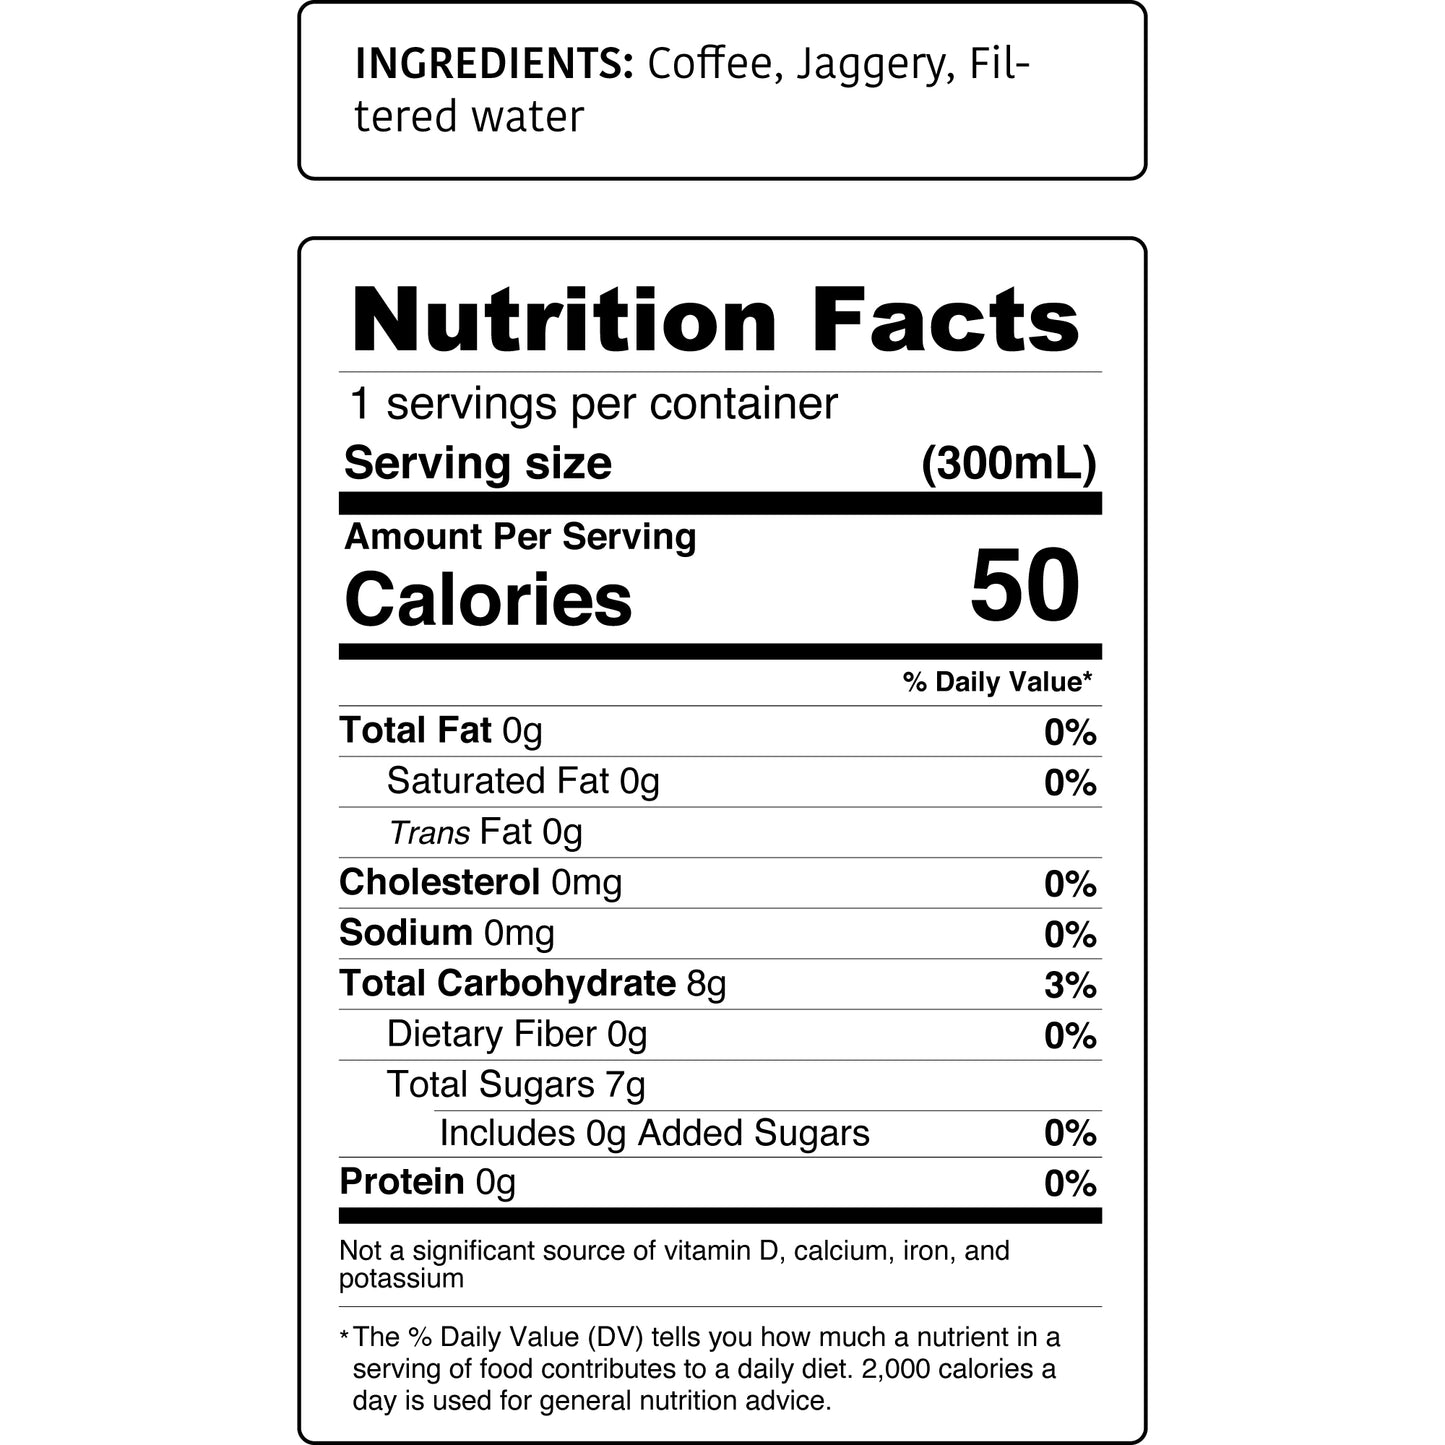 Kimbala coffee a la jaggery nutritions facts for 10.2oz bottle